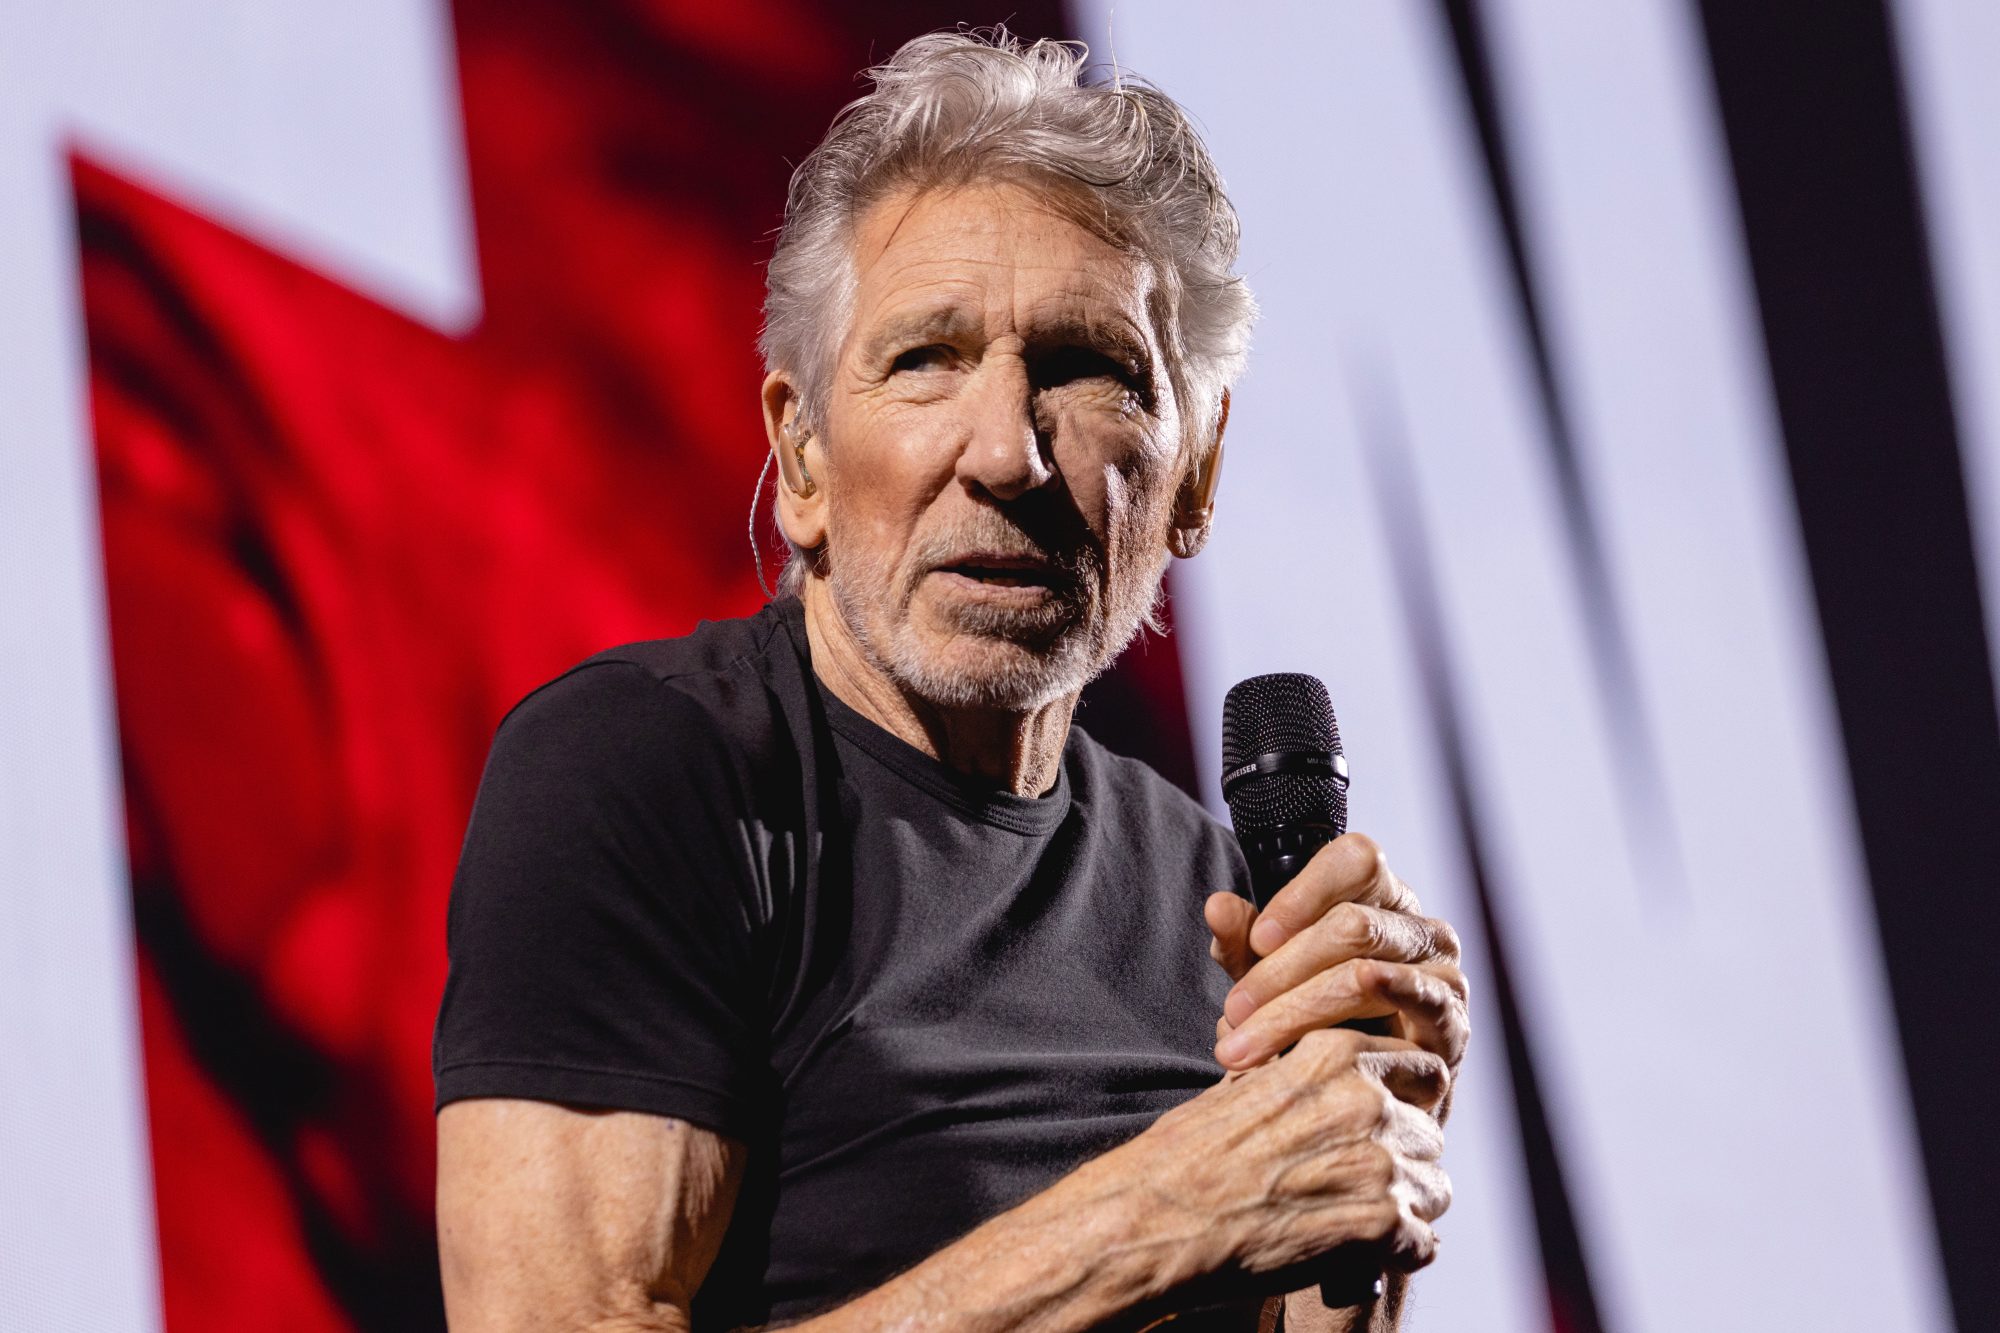 Roger Waters condemns 'disingenuous' attacks after criticism of Nazi-style costume at Berlin concert